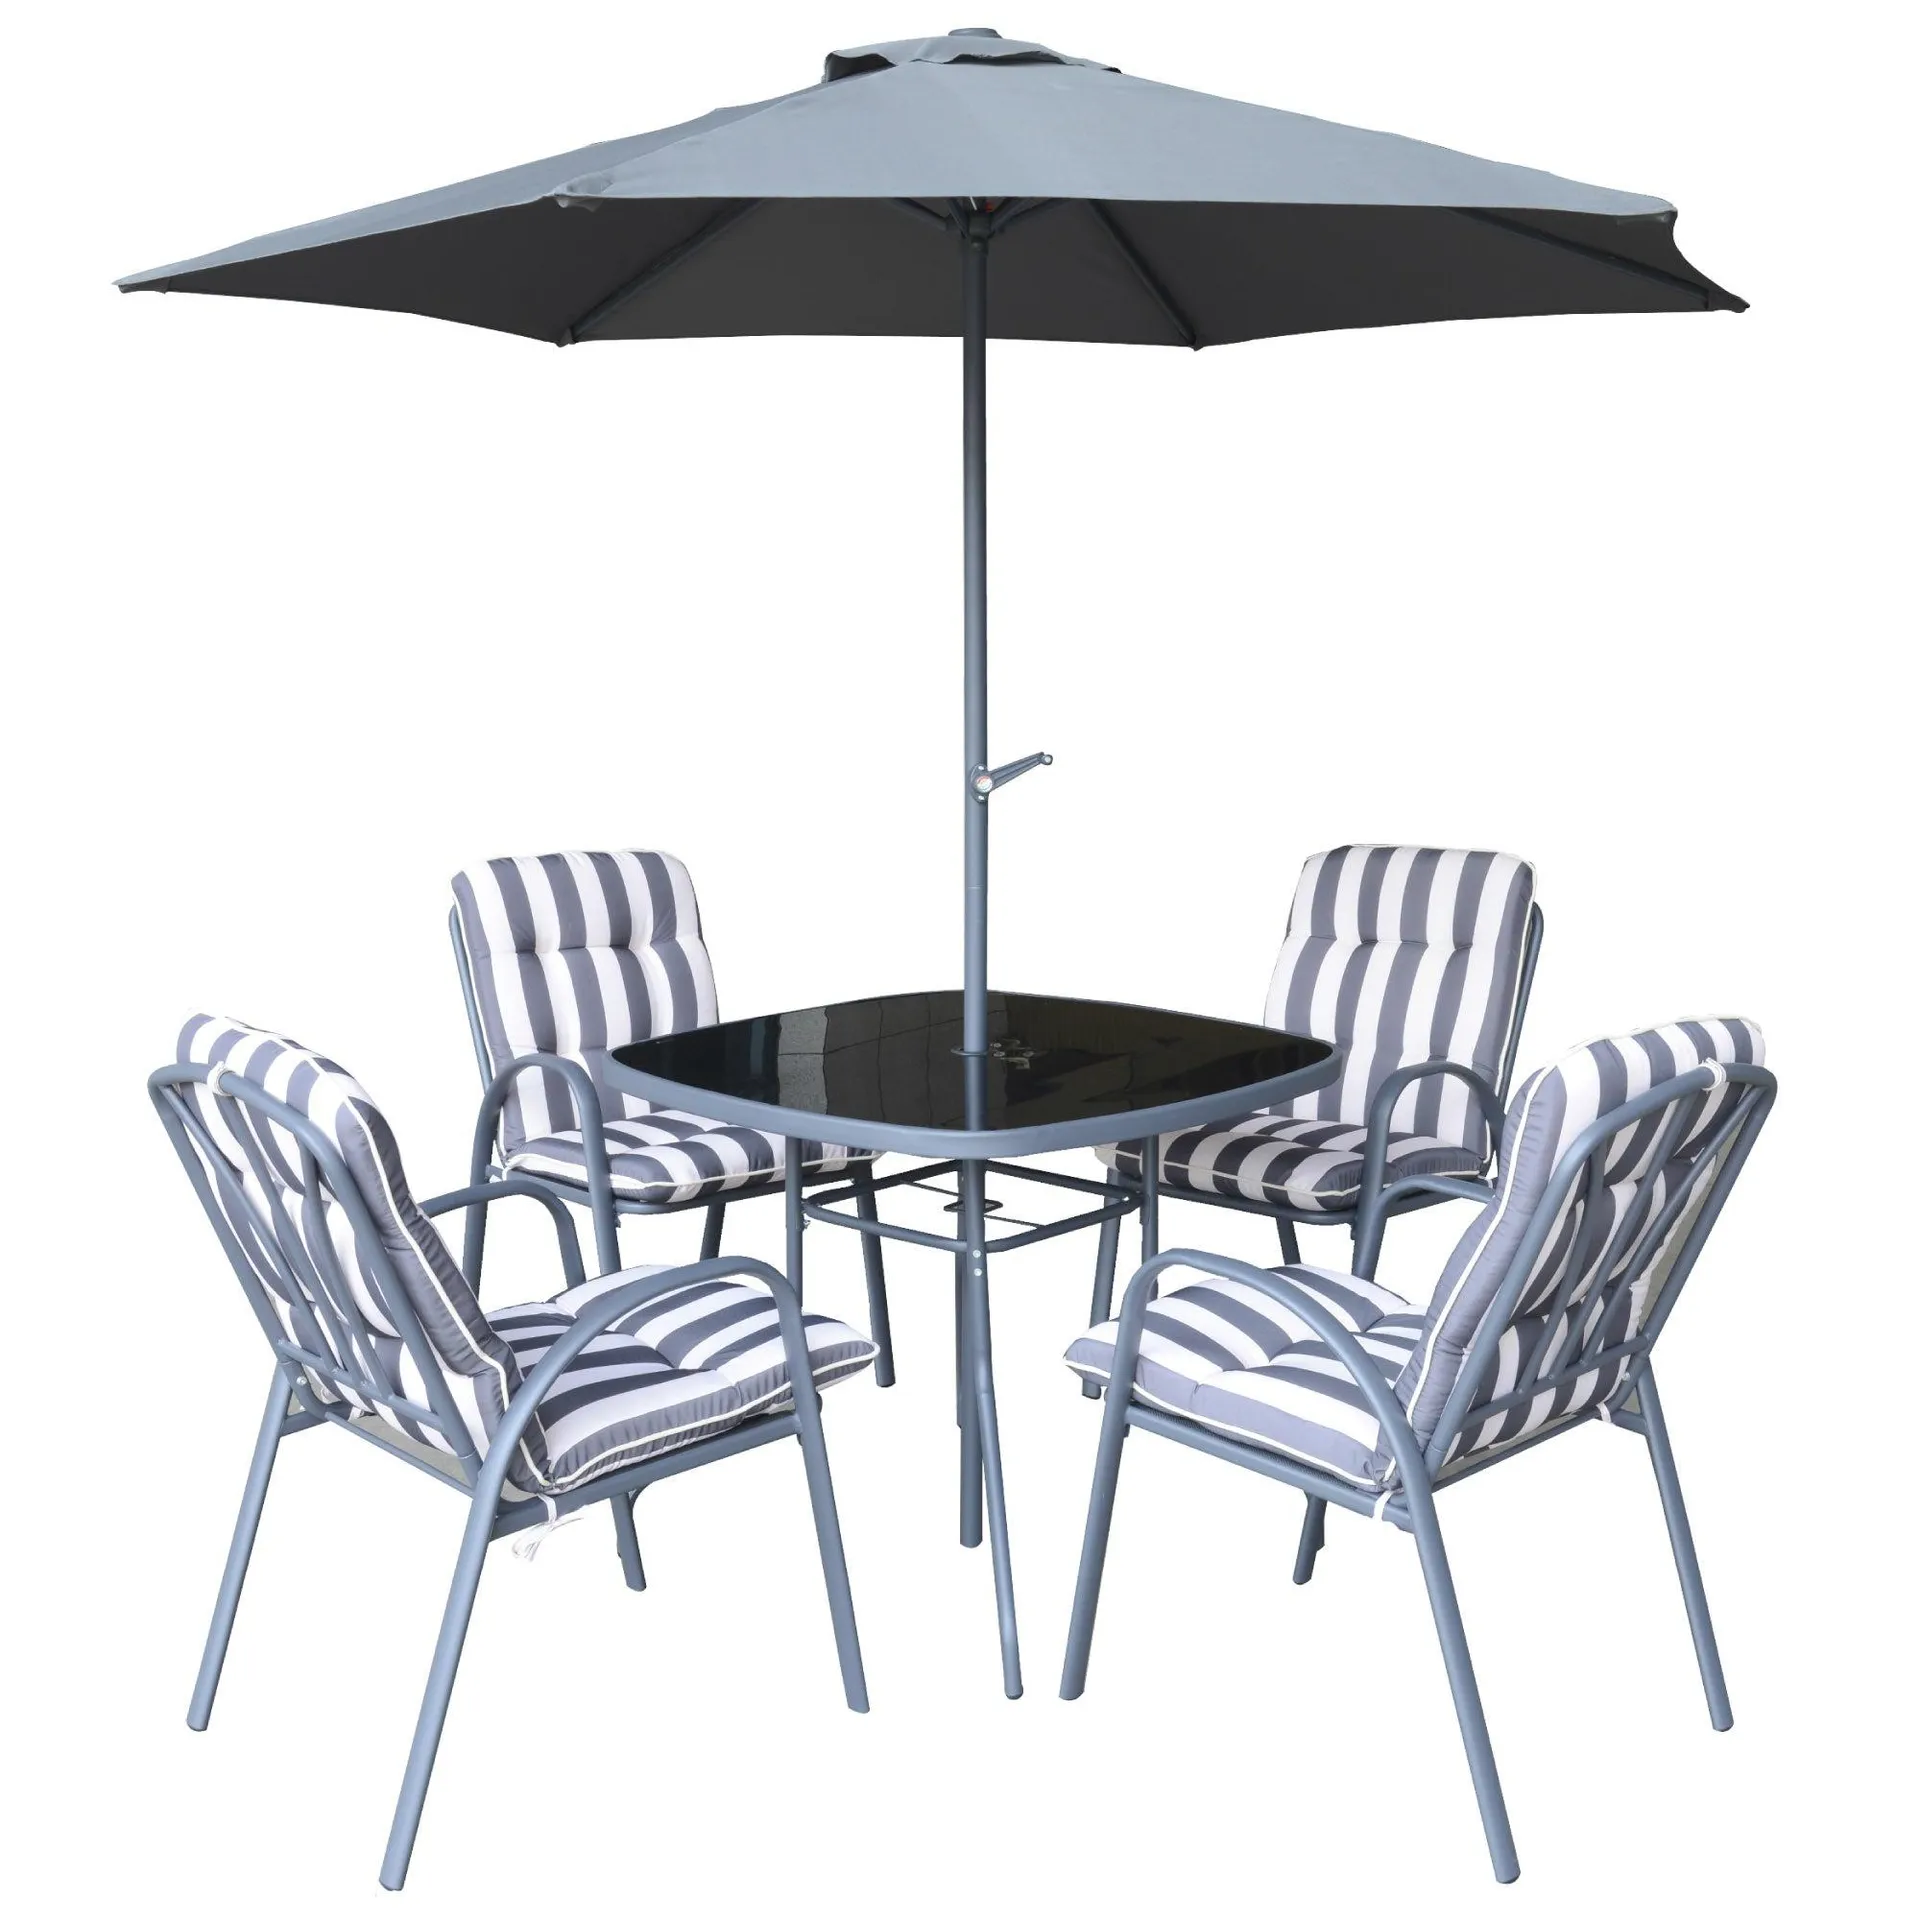 Silver & Stone Windsor Premium Padded 6 Piece Table & Chairs -Grey